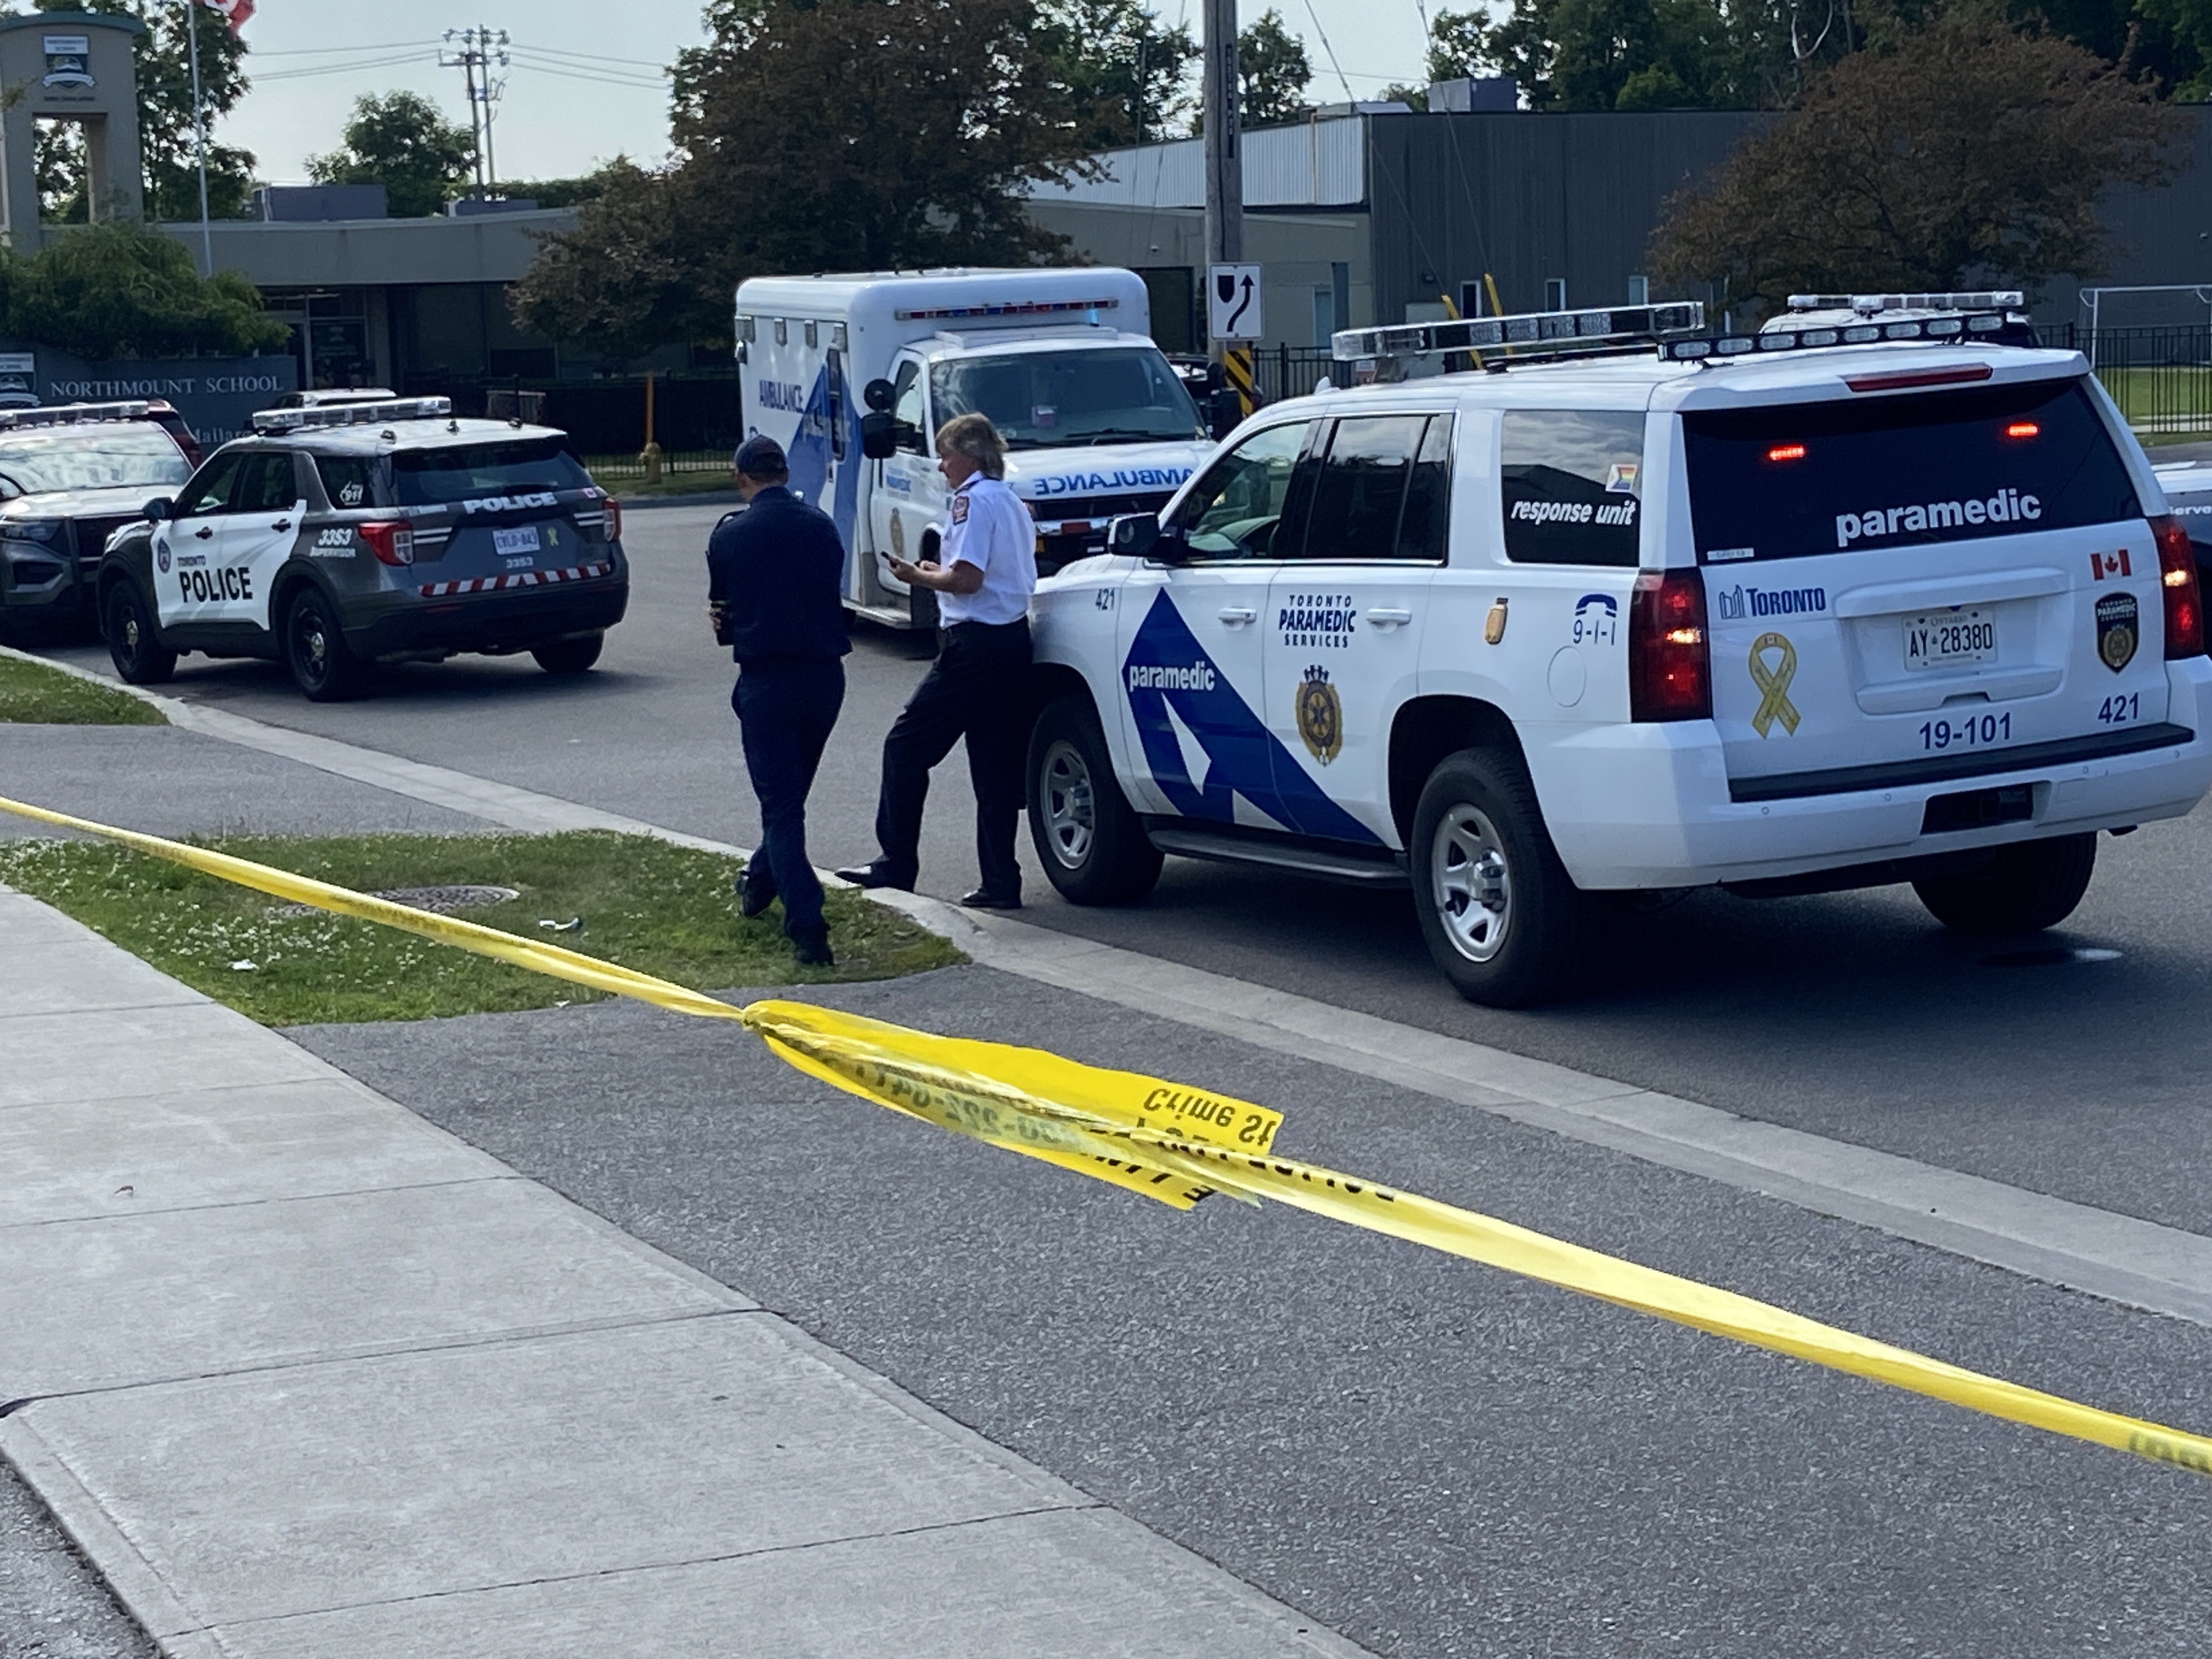 Suspected gunman among 3 dead in Toronto office shooting, police say